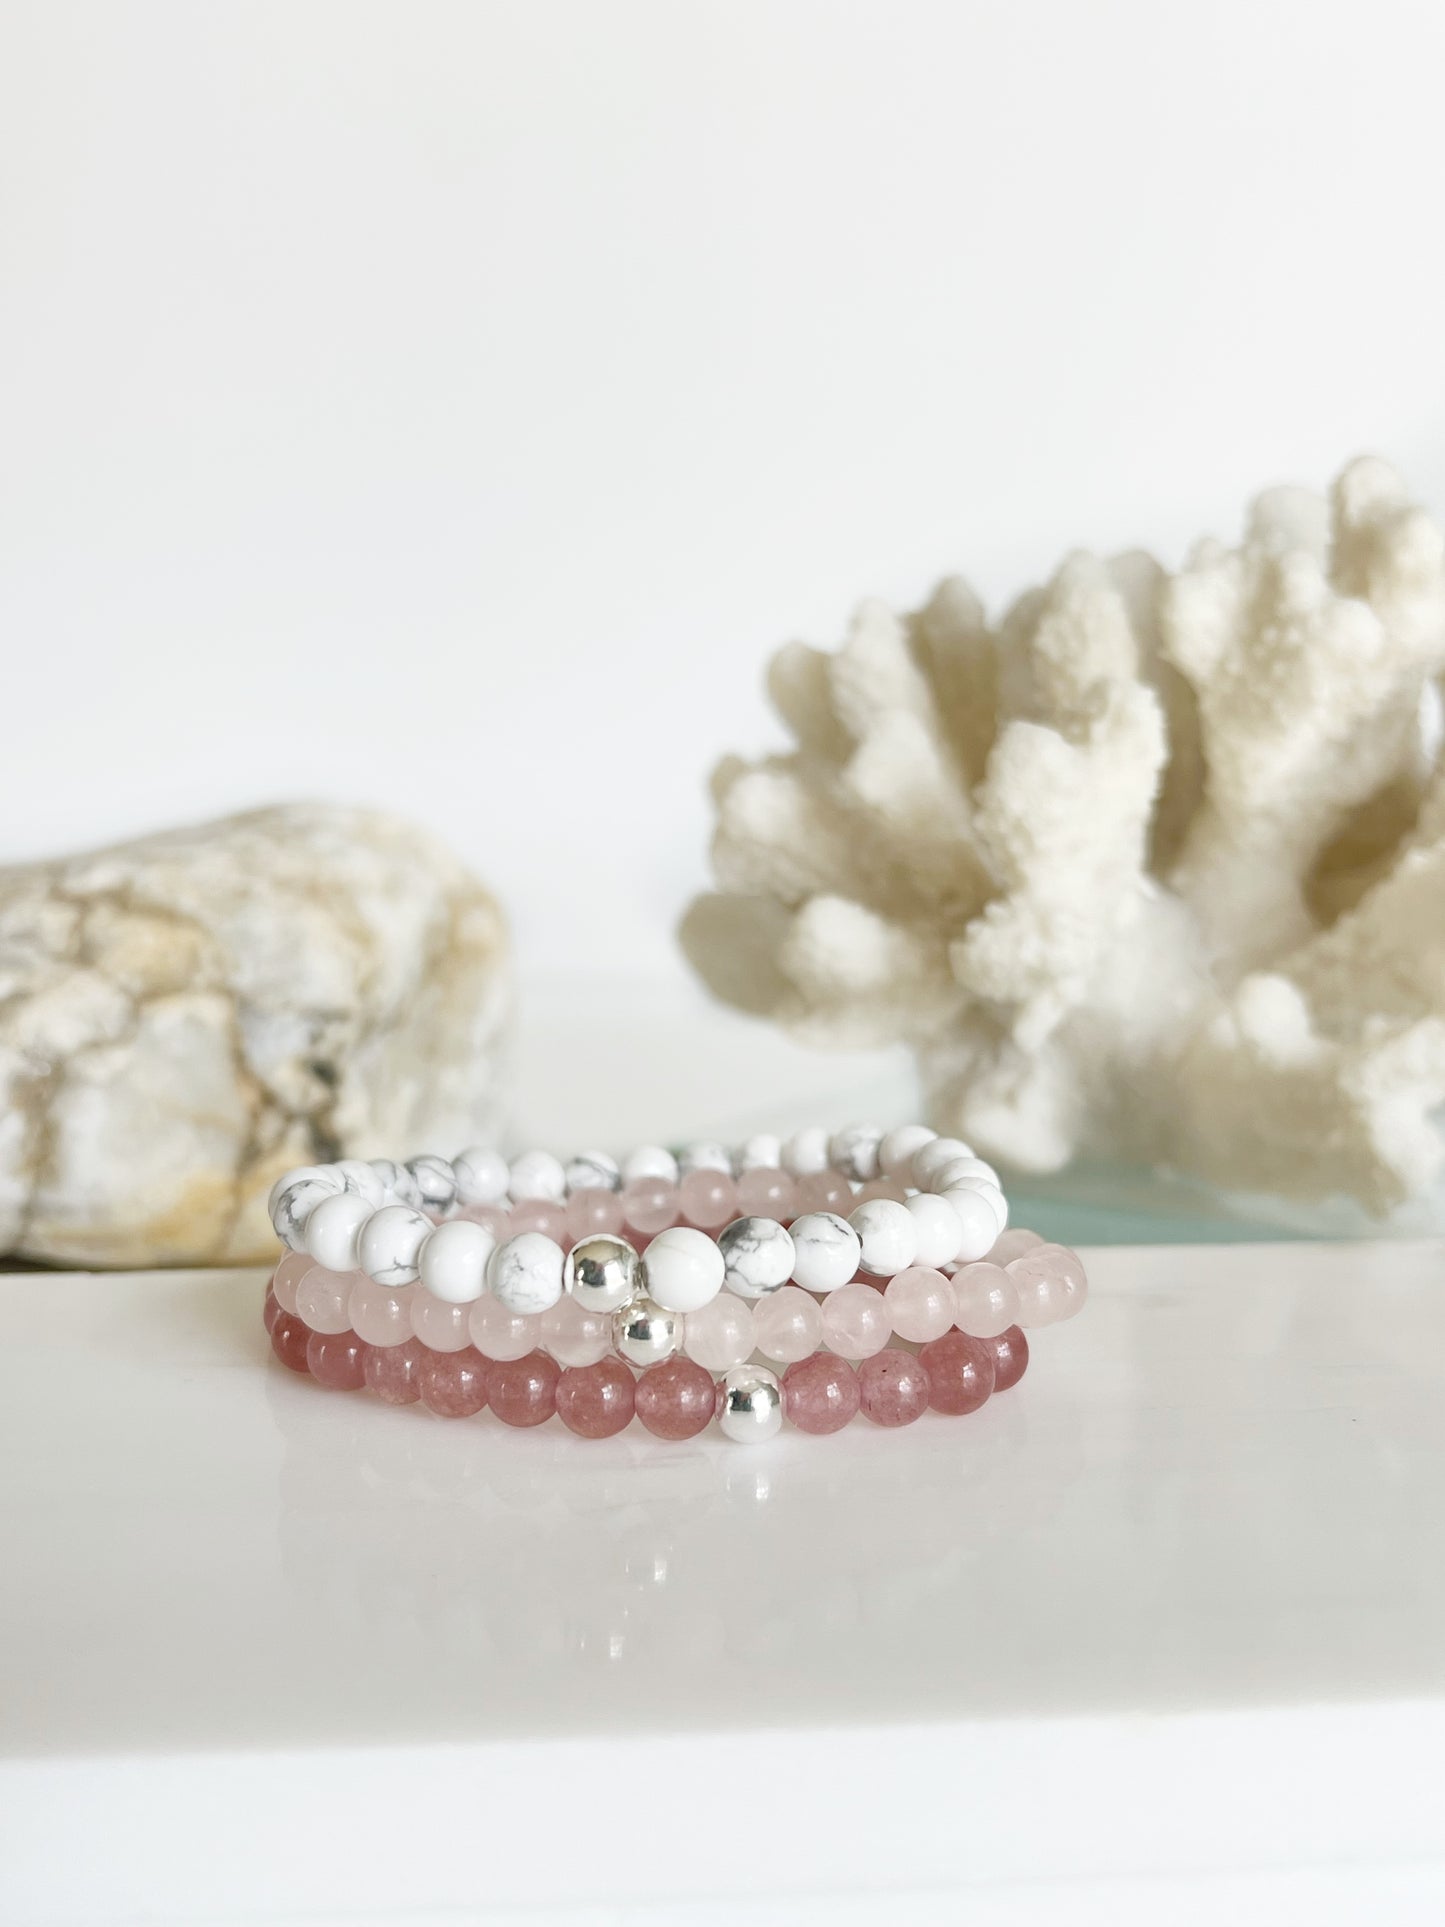 three stretch bracelets stacked on top of each other, a deep pink, light baby pink and white ones with one silver bead on each. They are in front of white coral and a light brown rock.